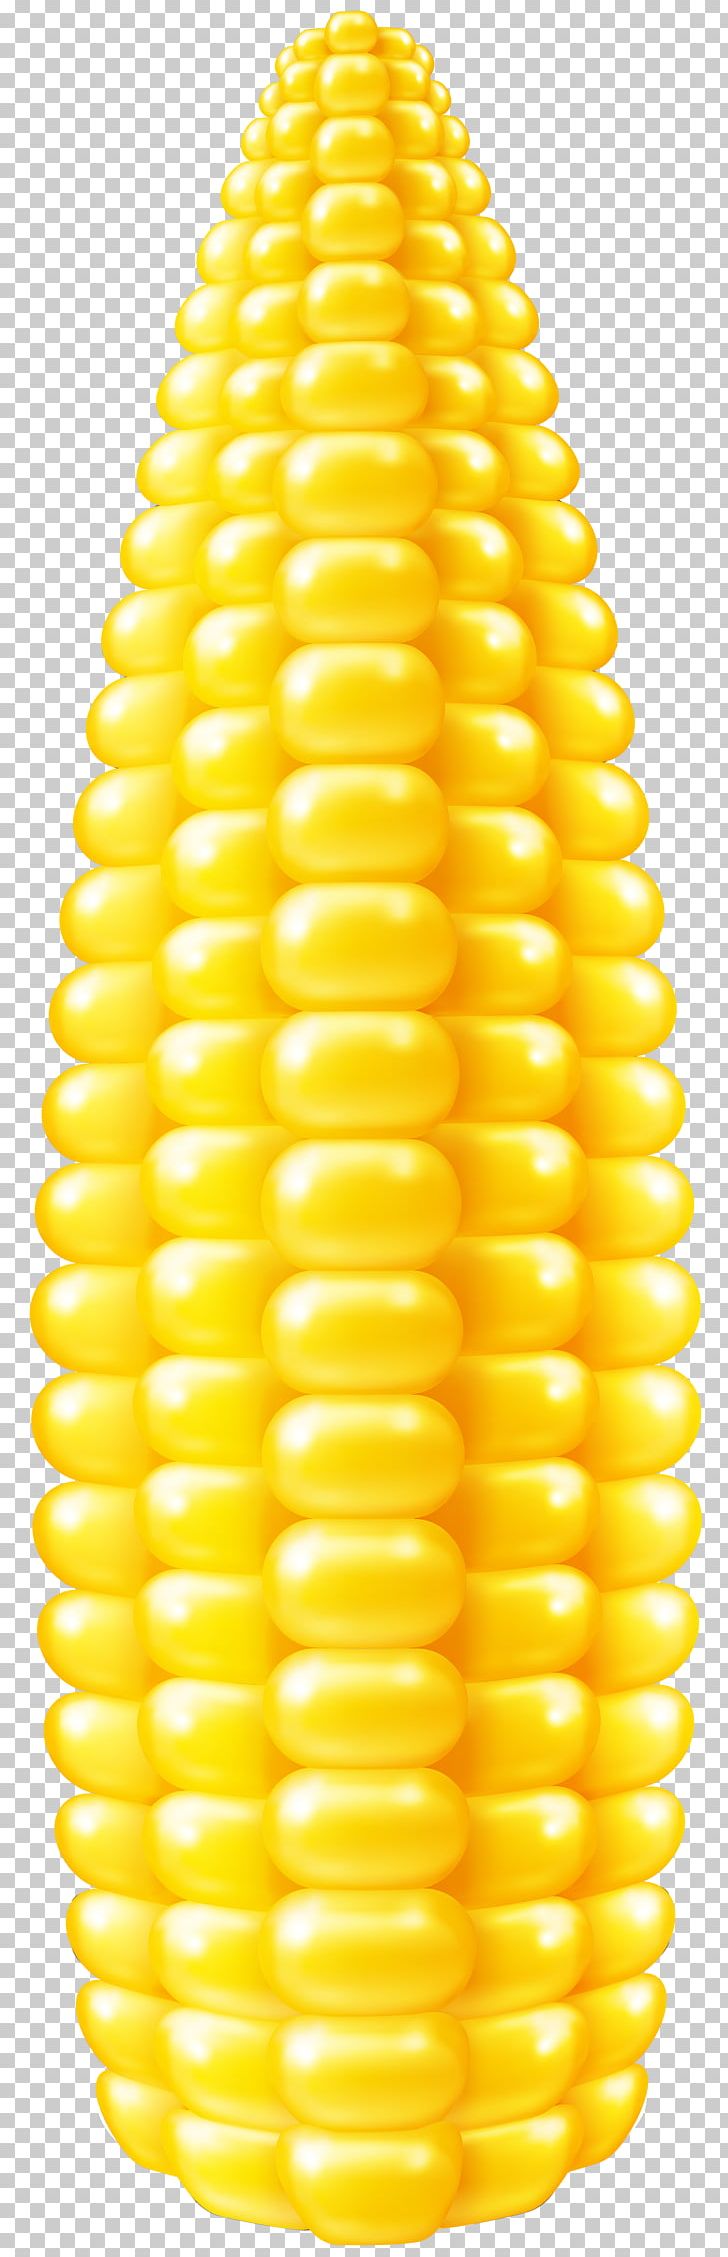 Corn On The Cob Drawing Maize PNG, Clipart, Commodity, Corn, Corn Kernel, Corn On The Cob, Desktop Wallpaper Free PNG Download